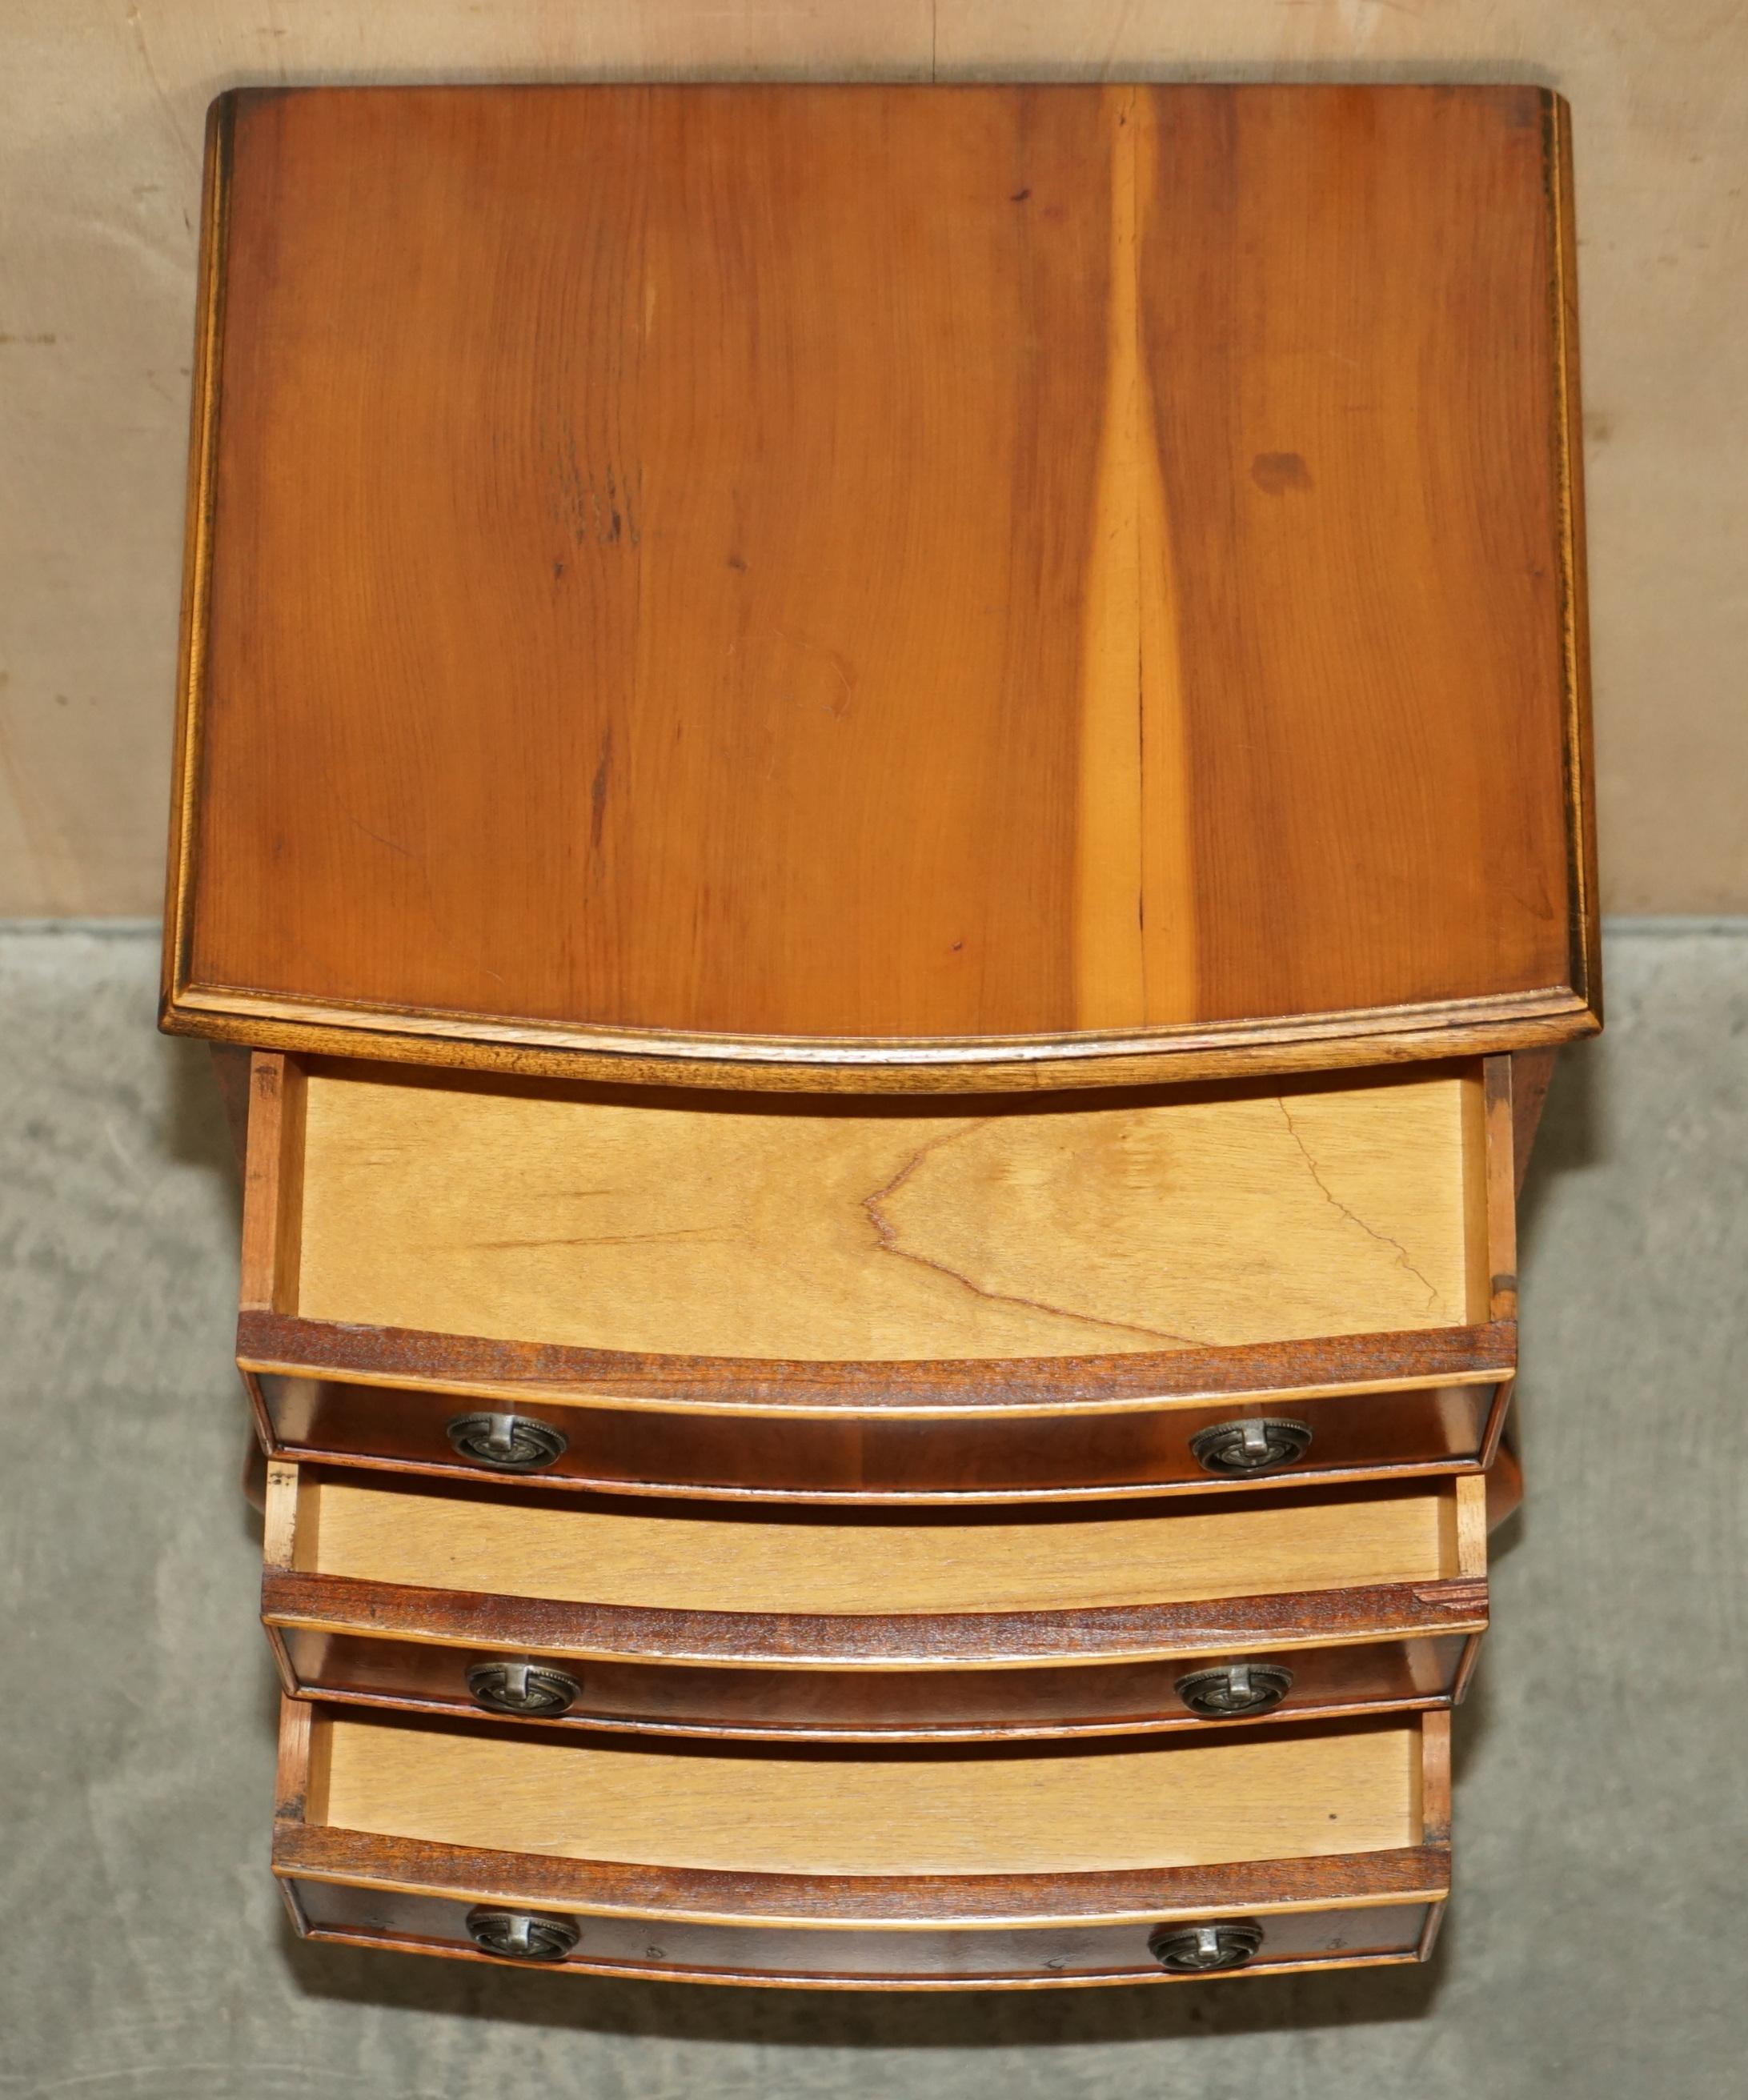 CIRCA 1940''s BURR YEW WOOD BOW FRONTED BEDSIDE SIDE TABLE CHEST OF DRAWERS im Angebot 12